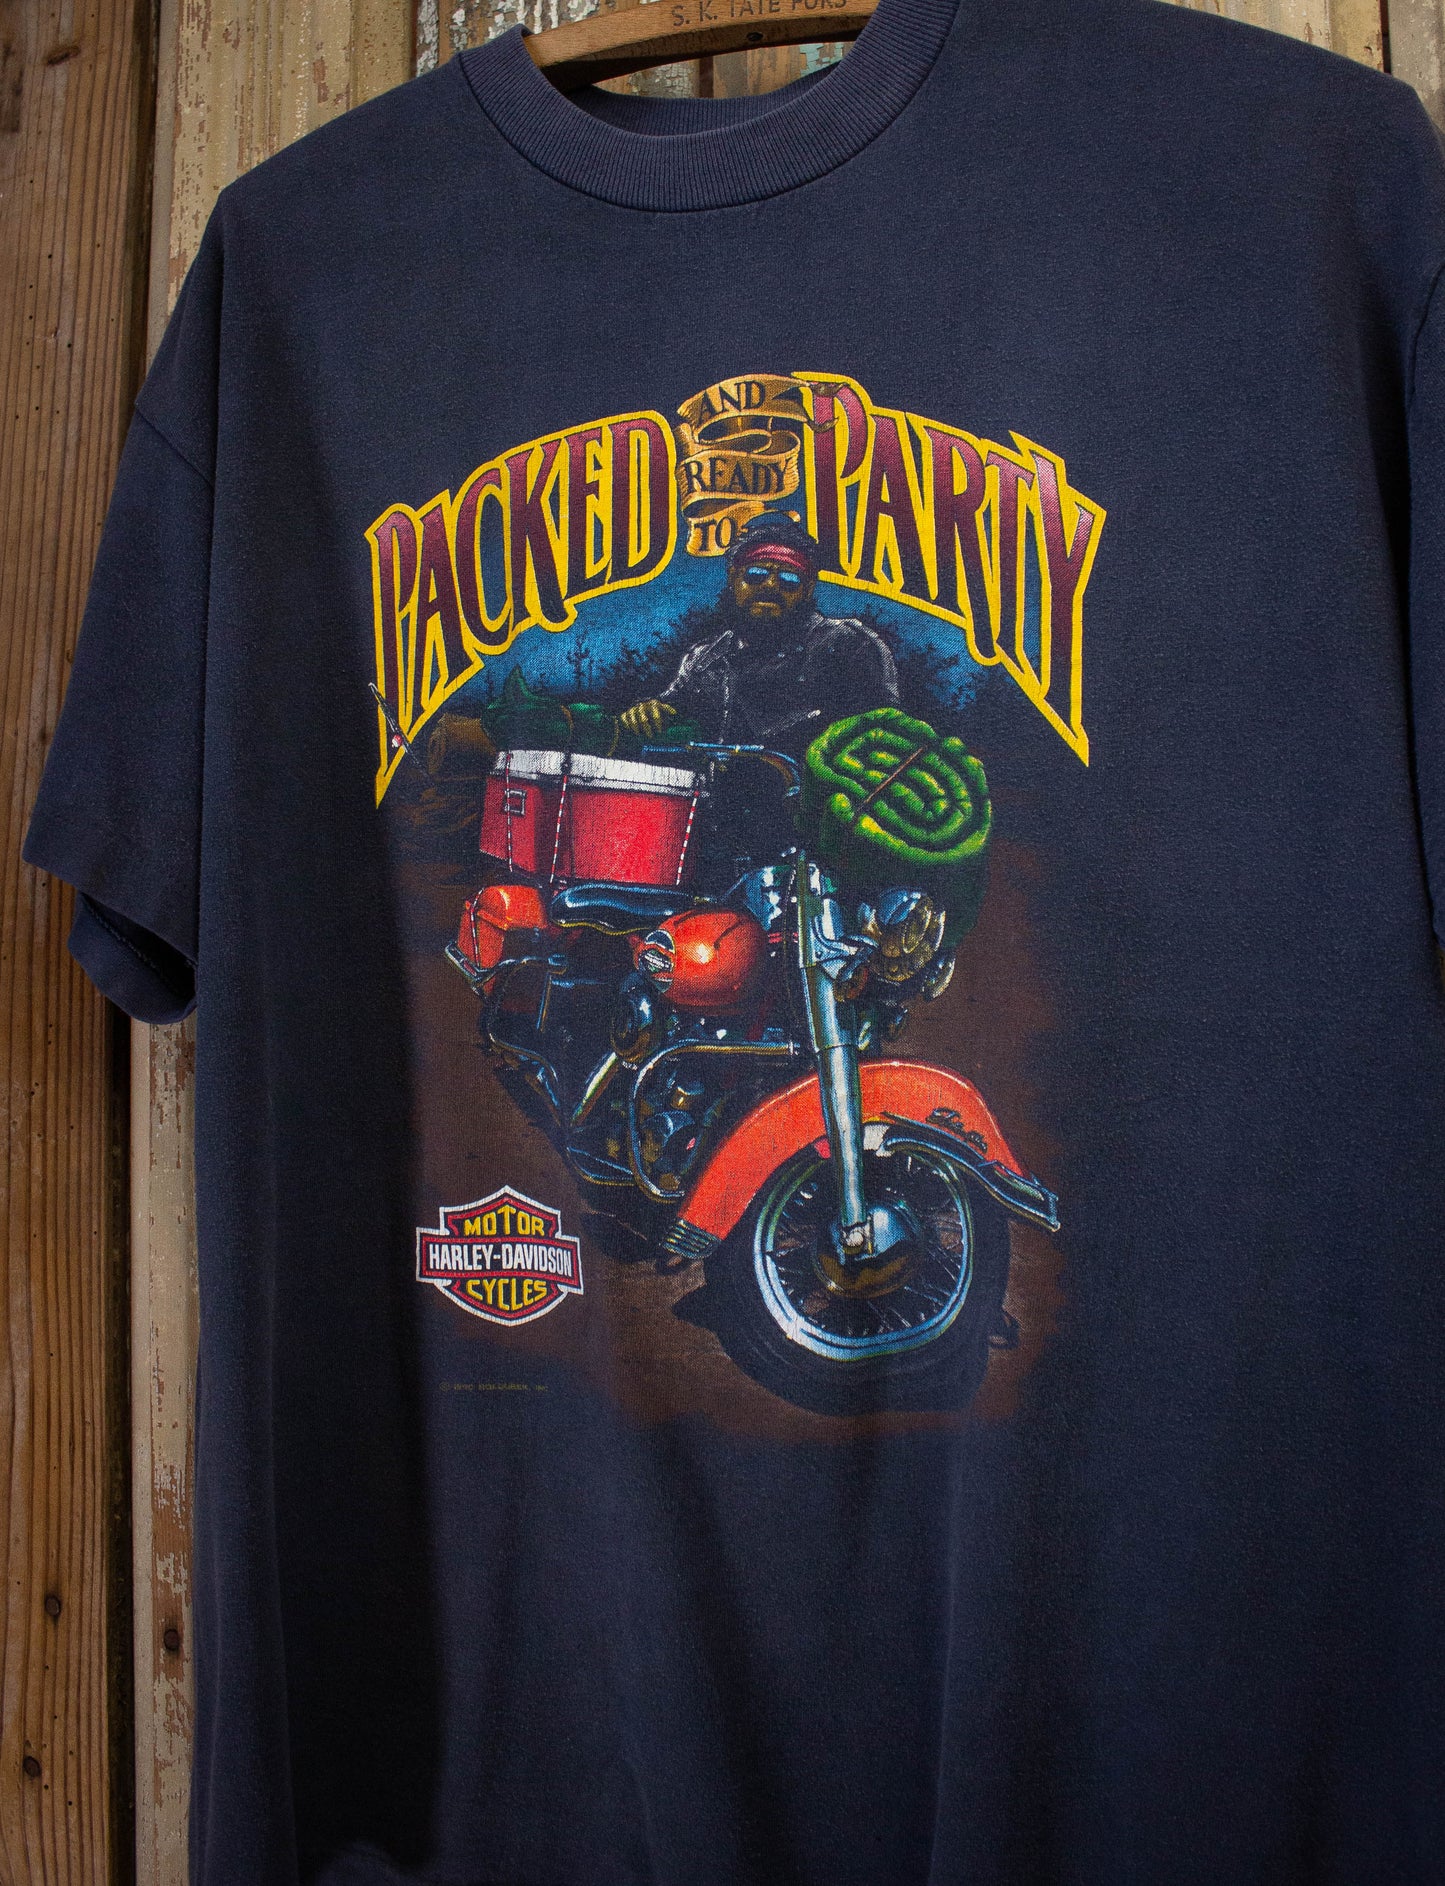 Vintage Harley Davidson Packed And Ready To Party Graphic T-Shirt 1990 XL